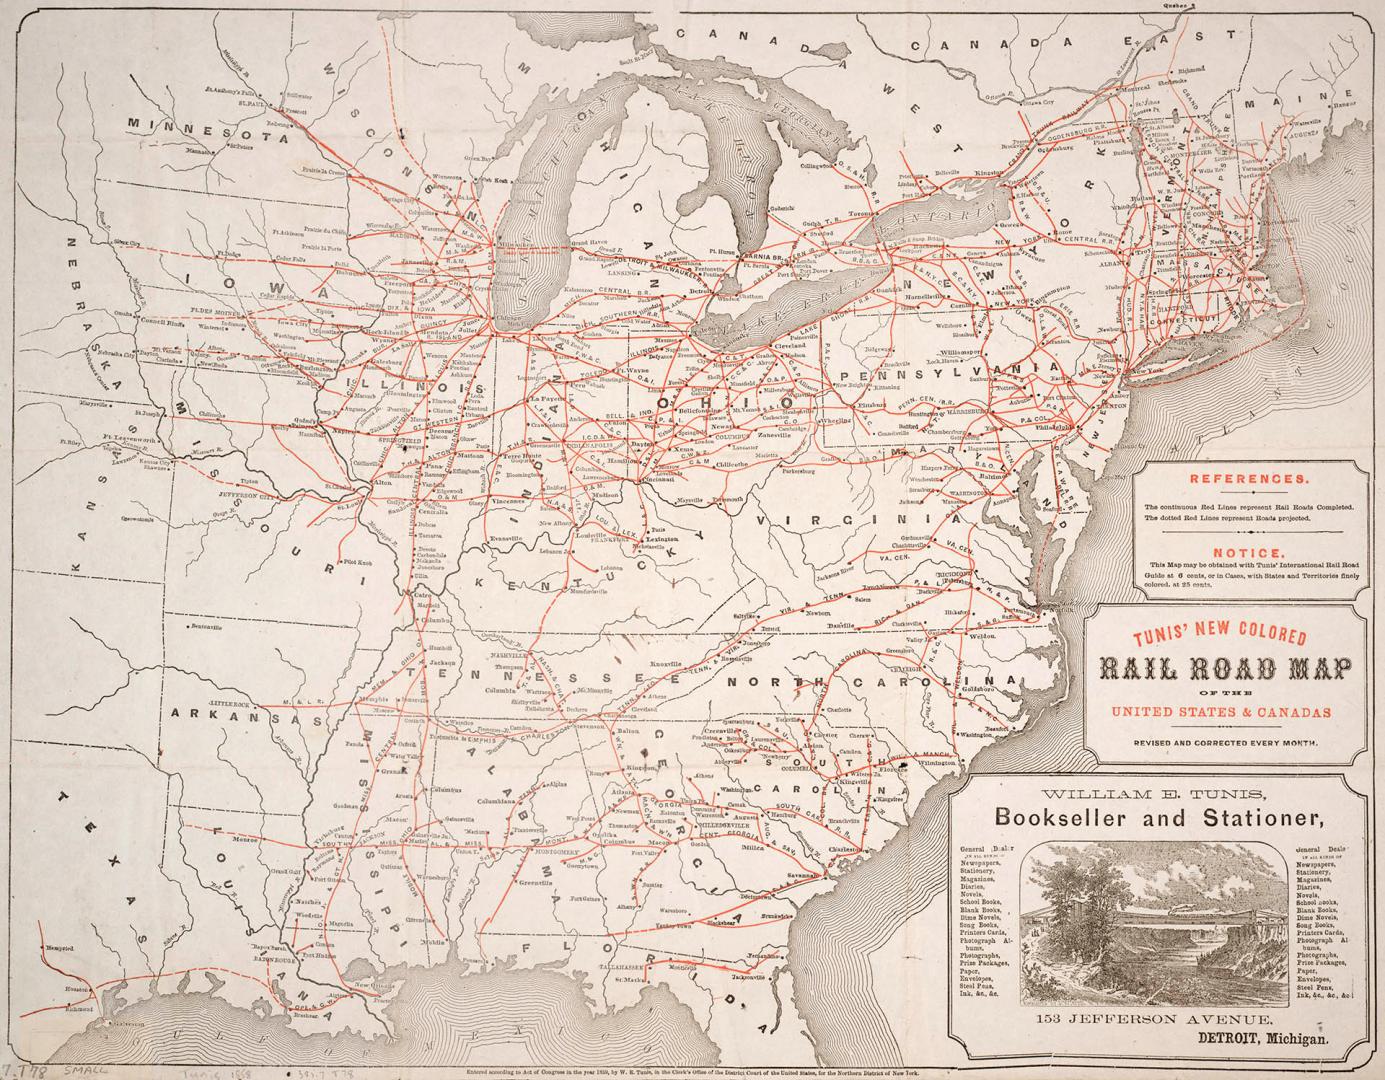 Tunis' new colored rail road map of the United States & Canadas